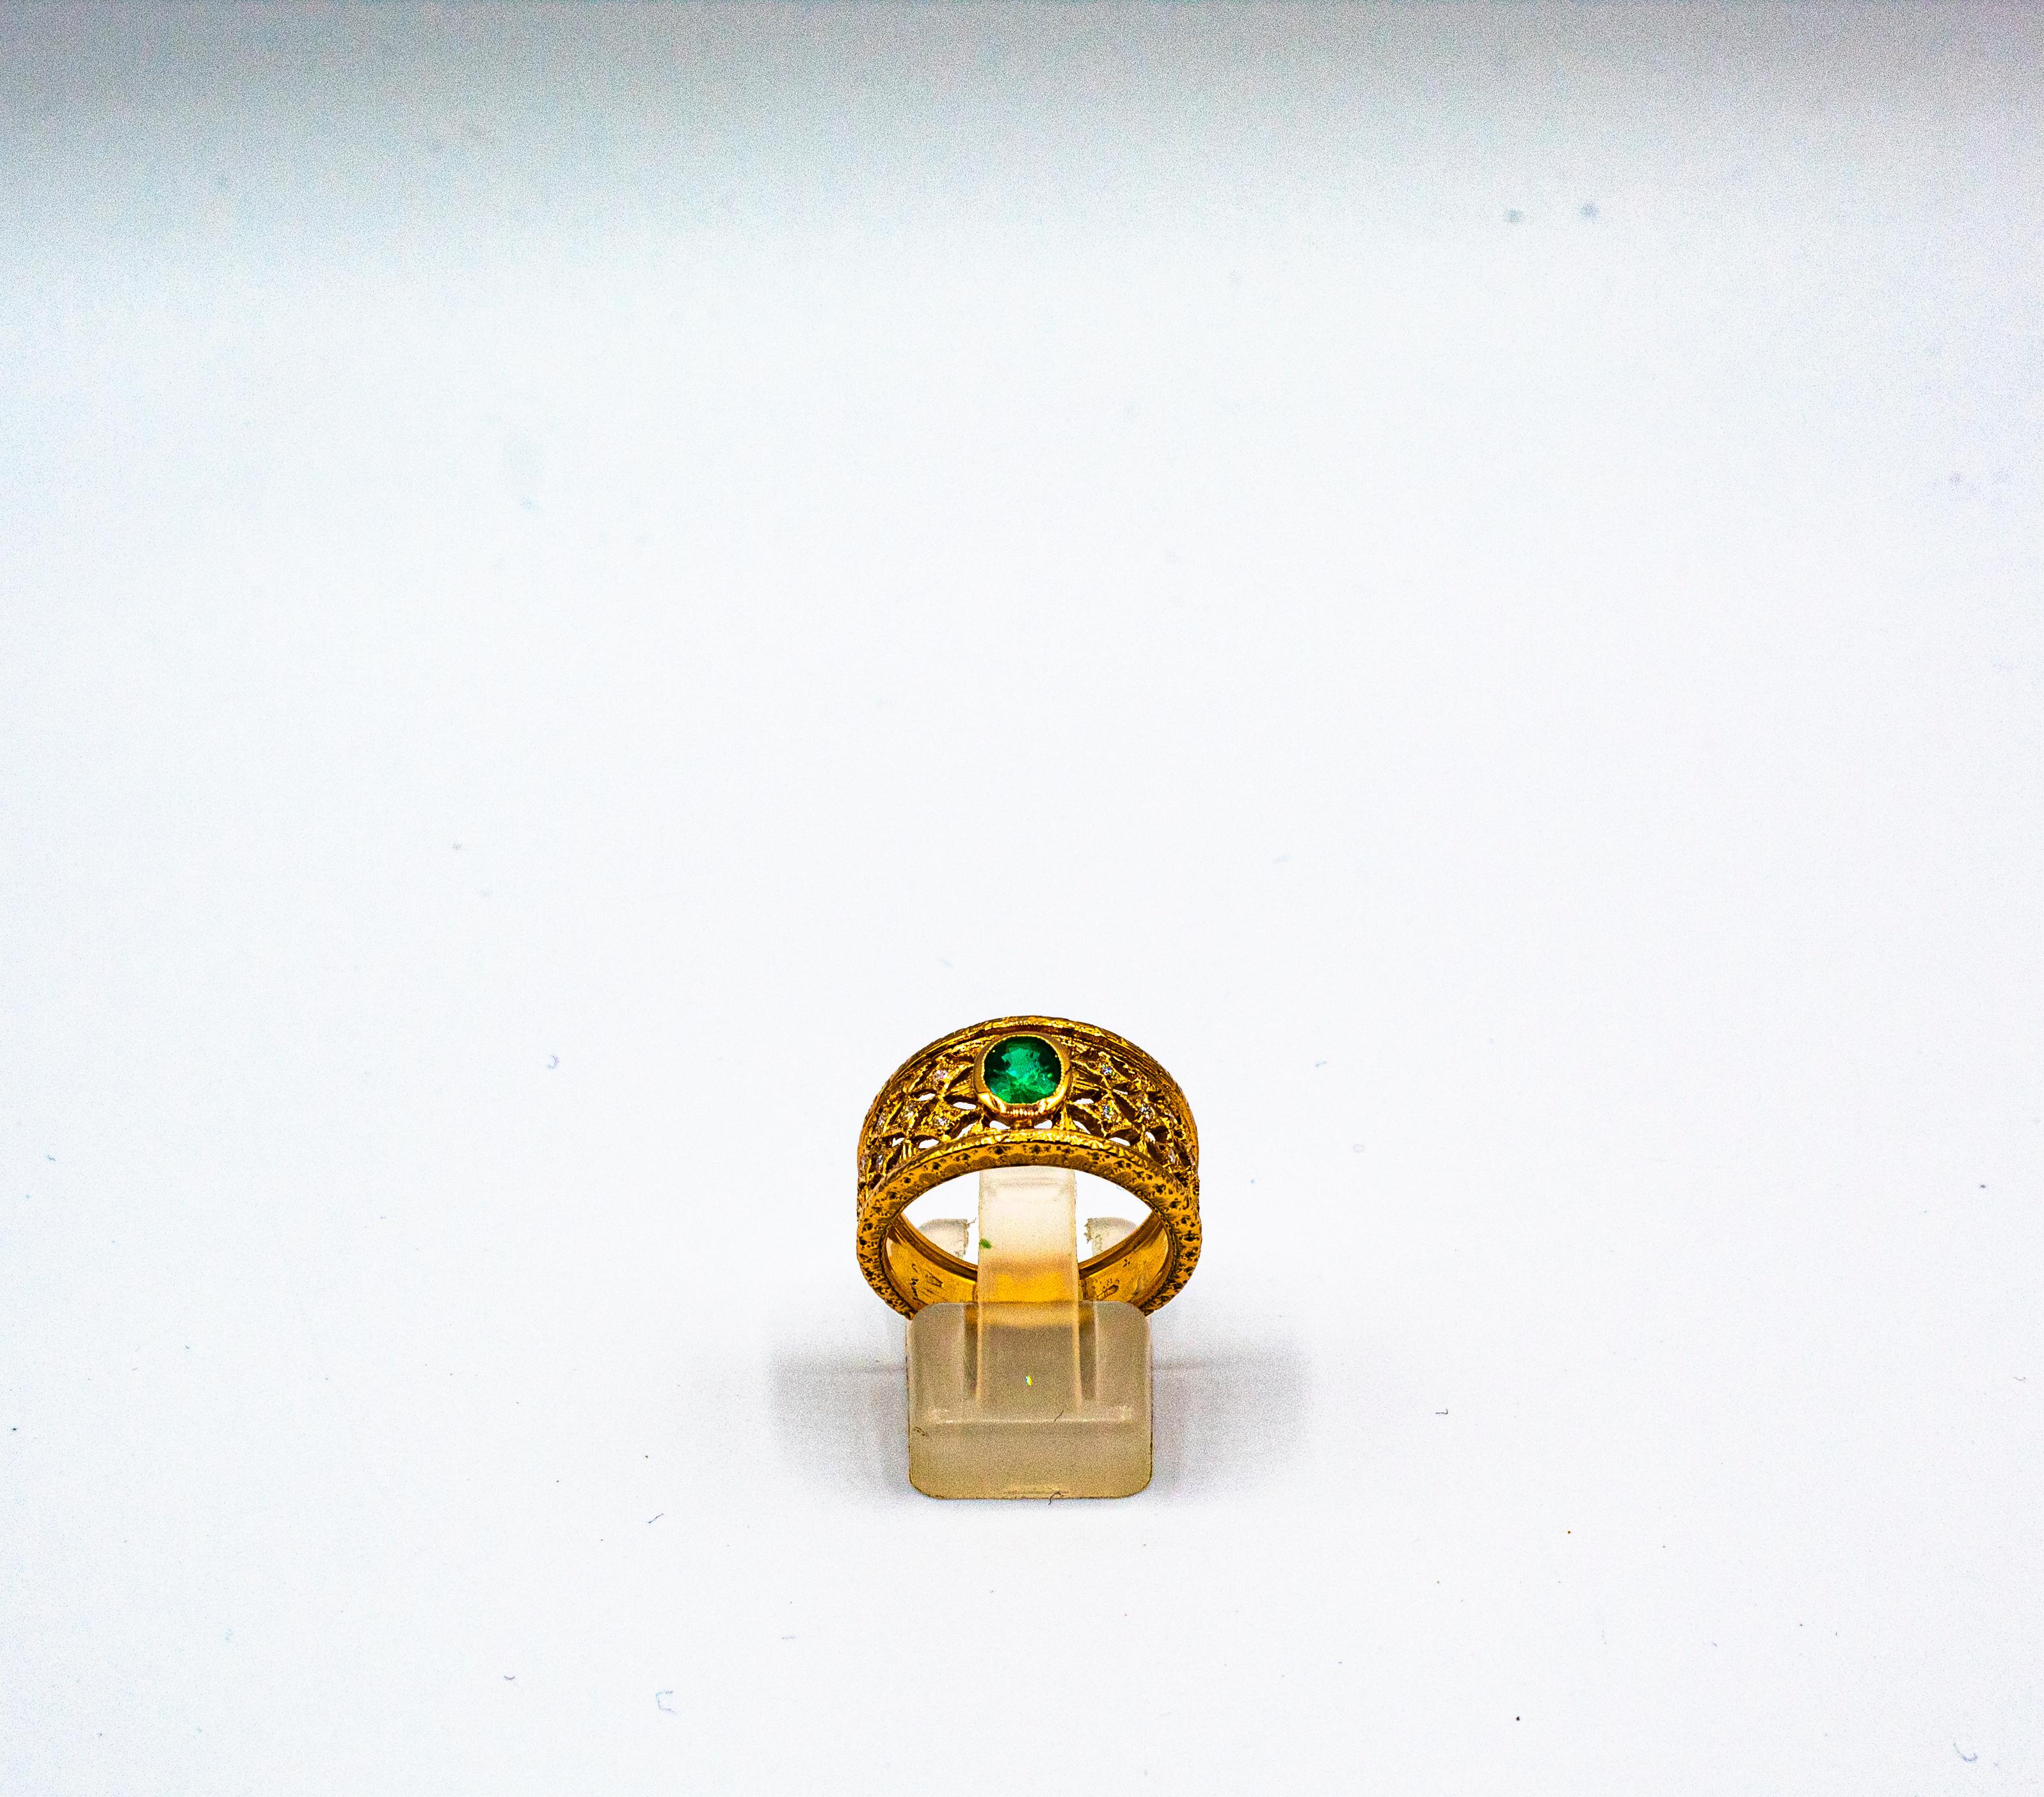 This Ring is made of 14K Yellow Gold.
This Ring has 0.15 Carats of White Brilliant Cut Diamonds.
This Ring has a 0.50 Carats Natural Zambia Oval Cut Emerald.
This Ring is inspired by Art Deco.

Size ITA: 13 USA: 6 1/2

We're a workshop so every